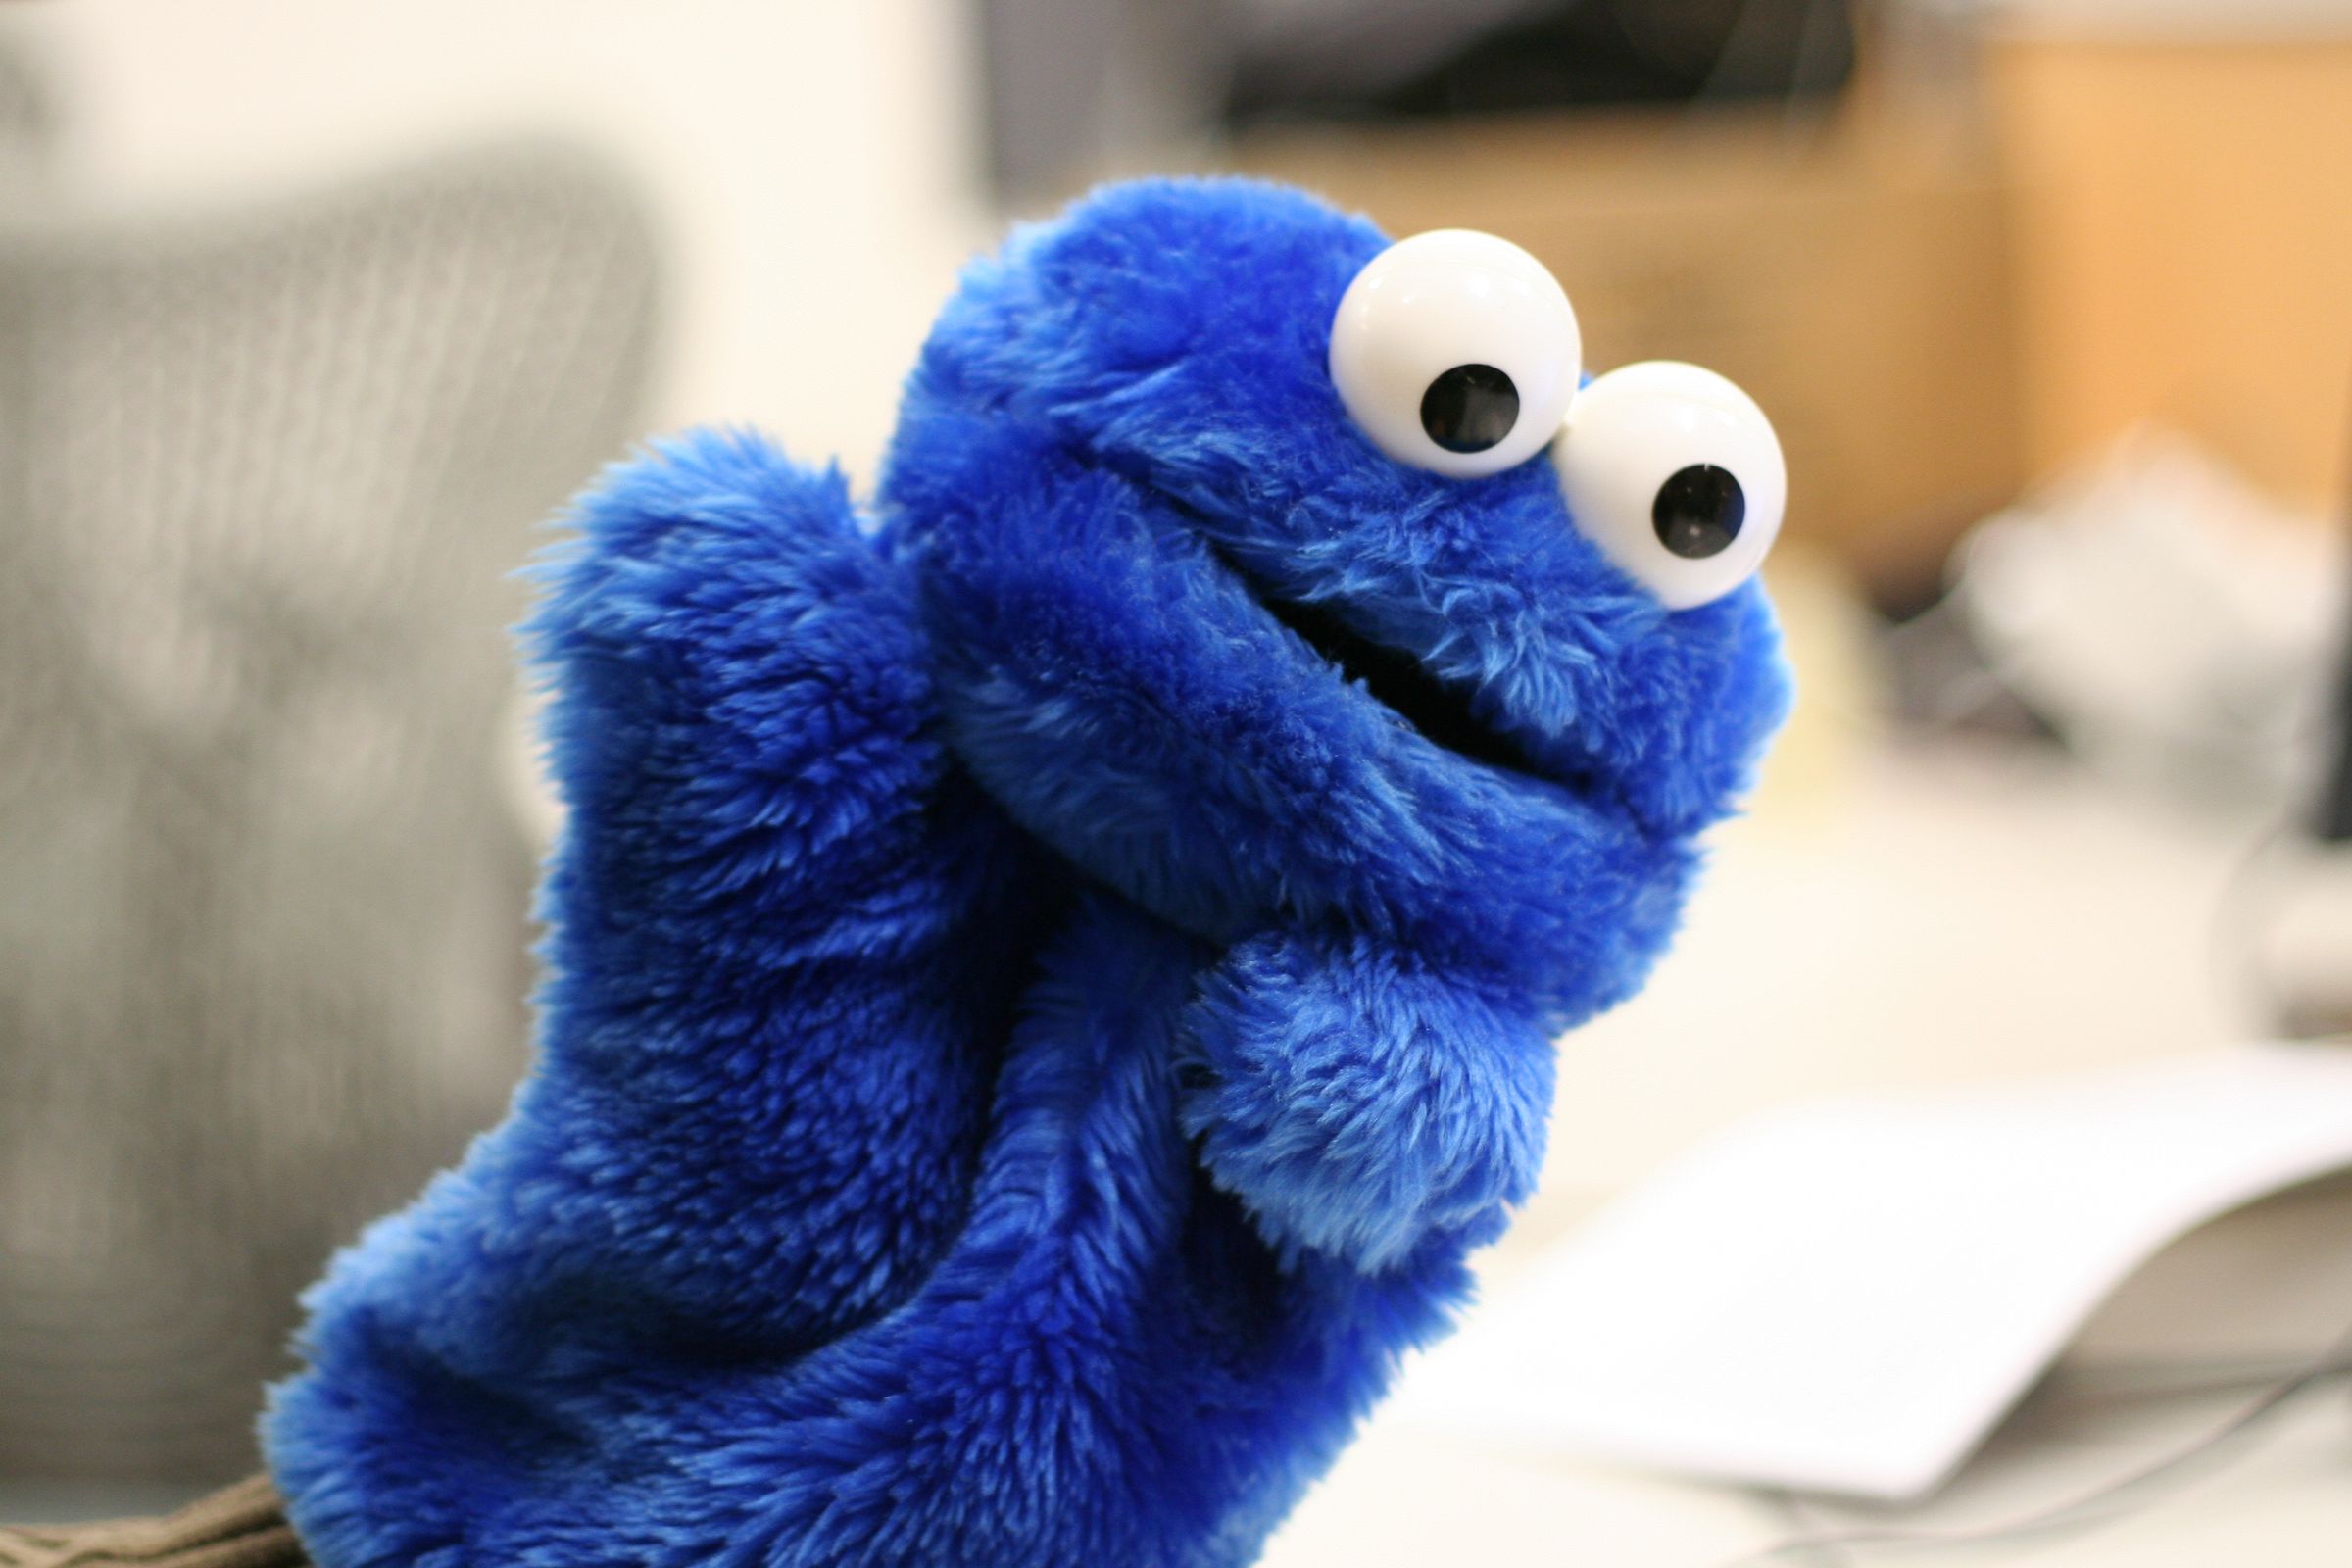 Cookie Monster puppet (not a puppet used in the actual study, sadly).